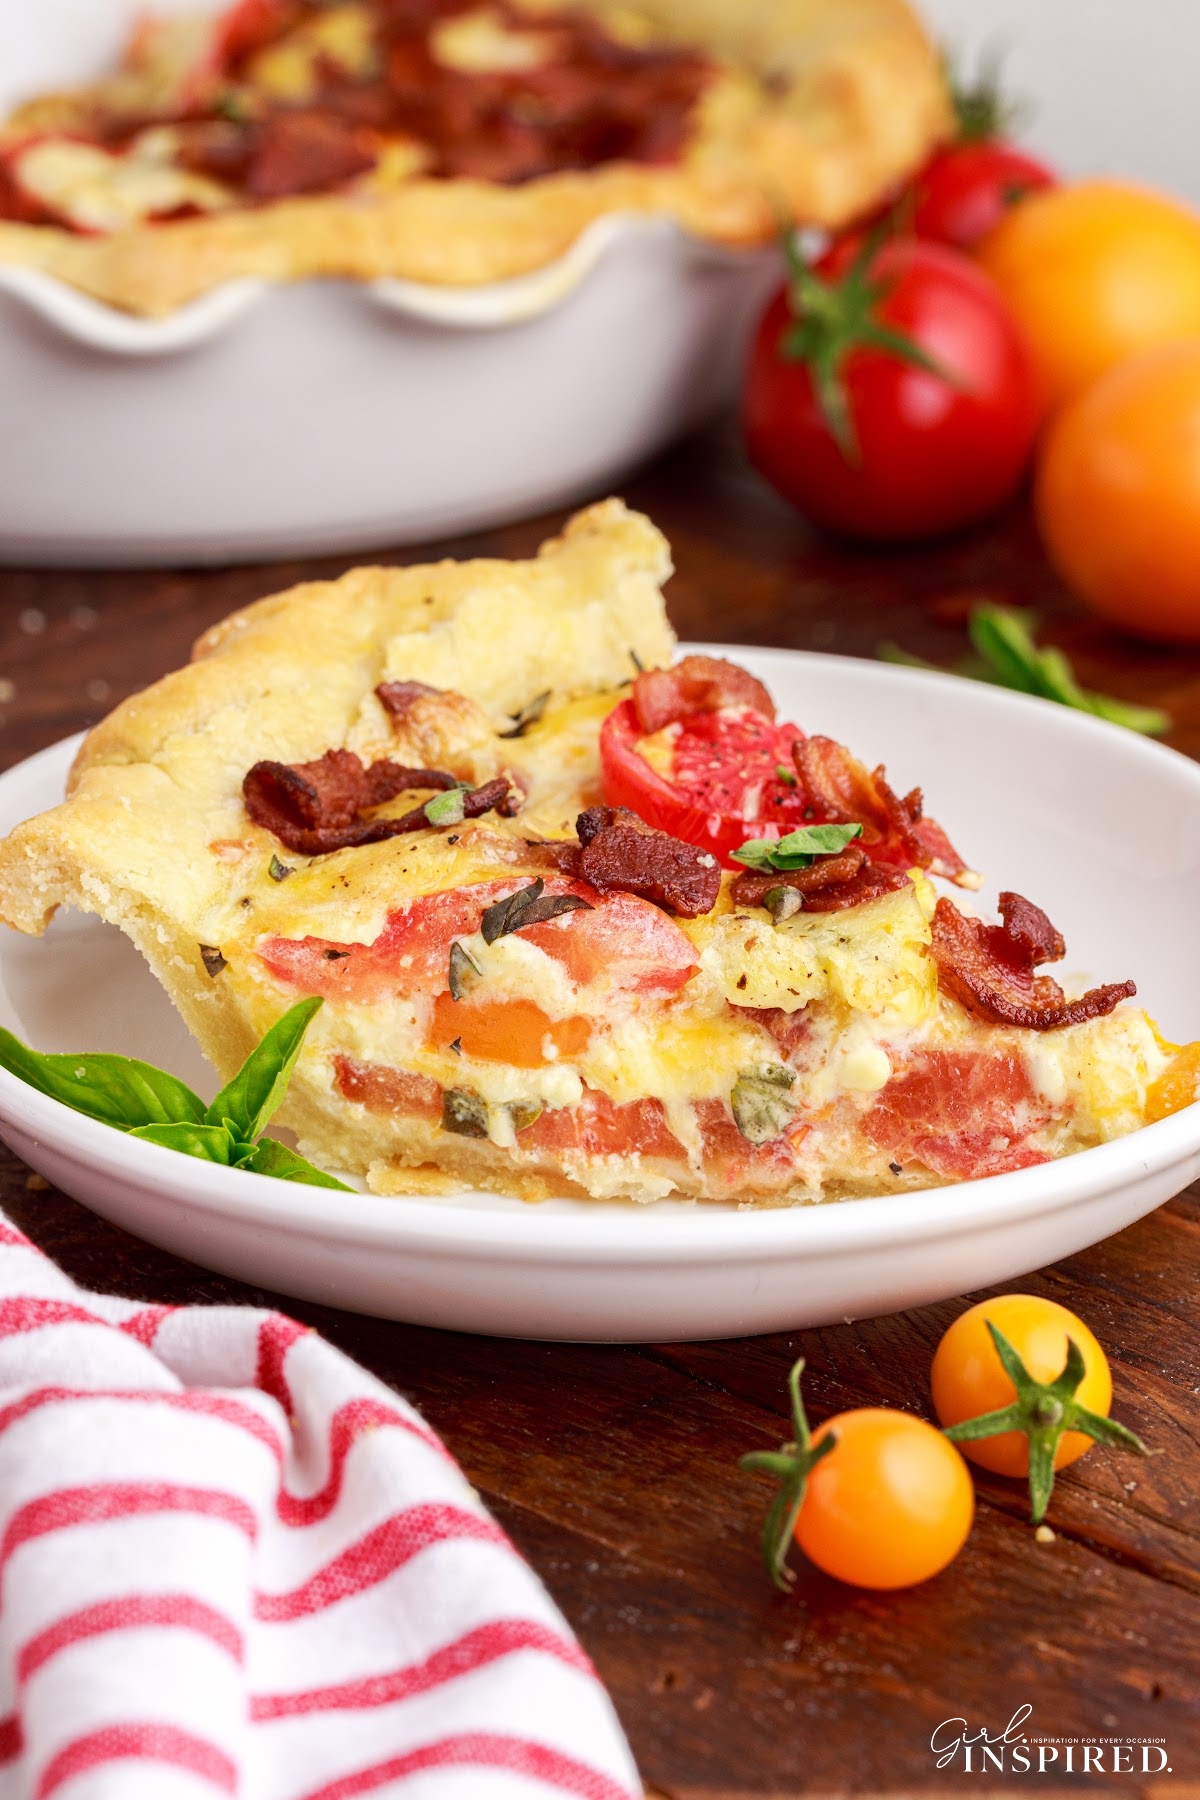 Slice of Southern tomato pie on small plate in front of pie dish and whole tomatoes.